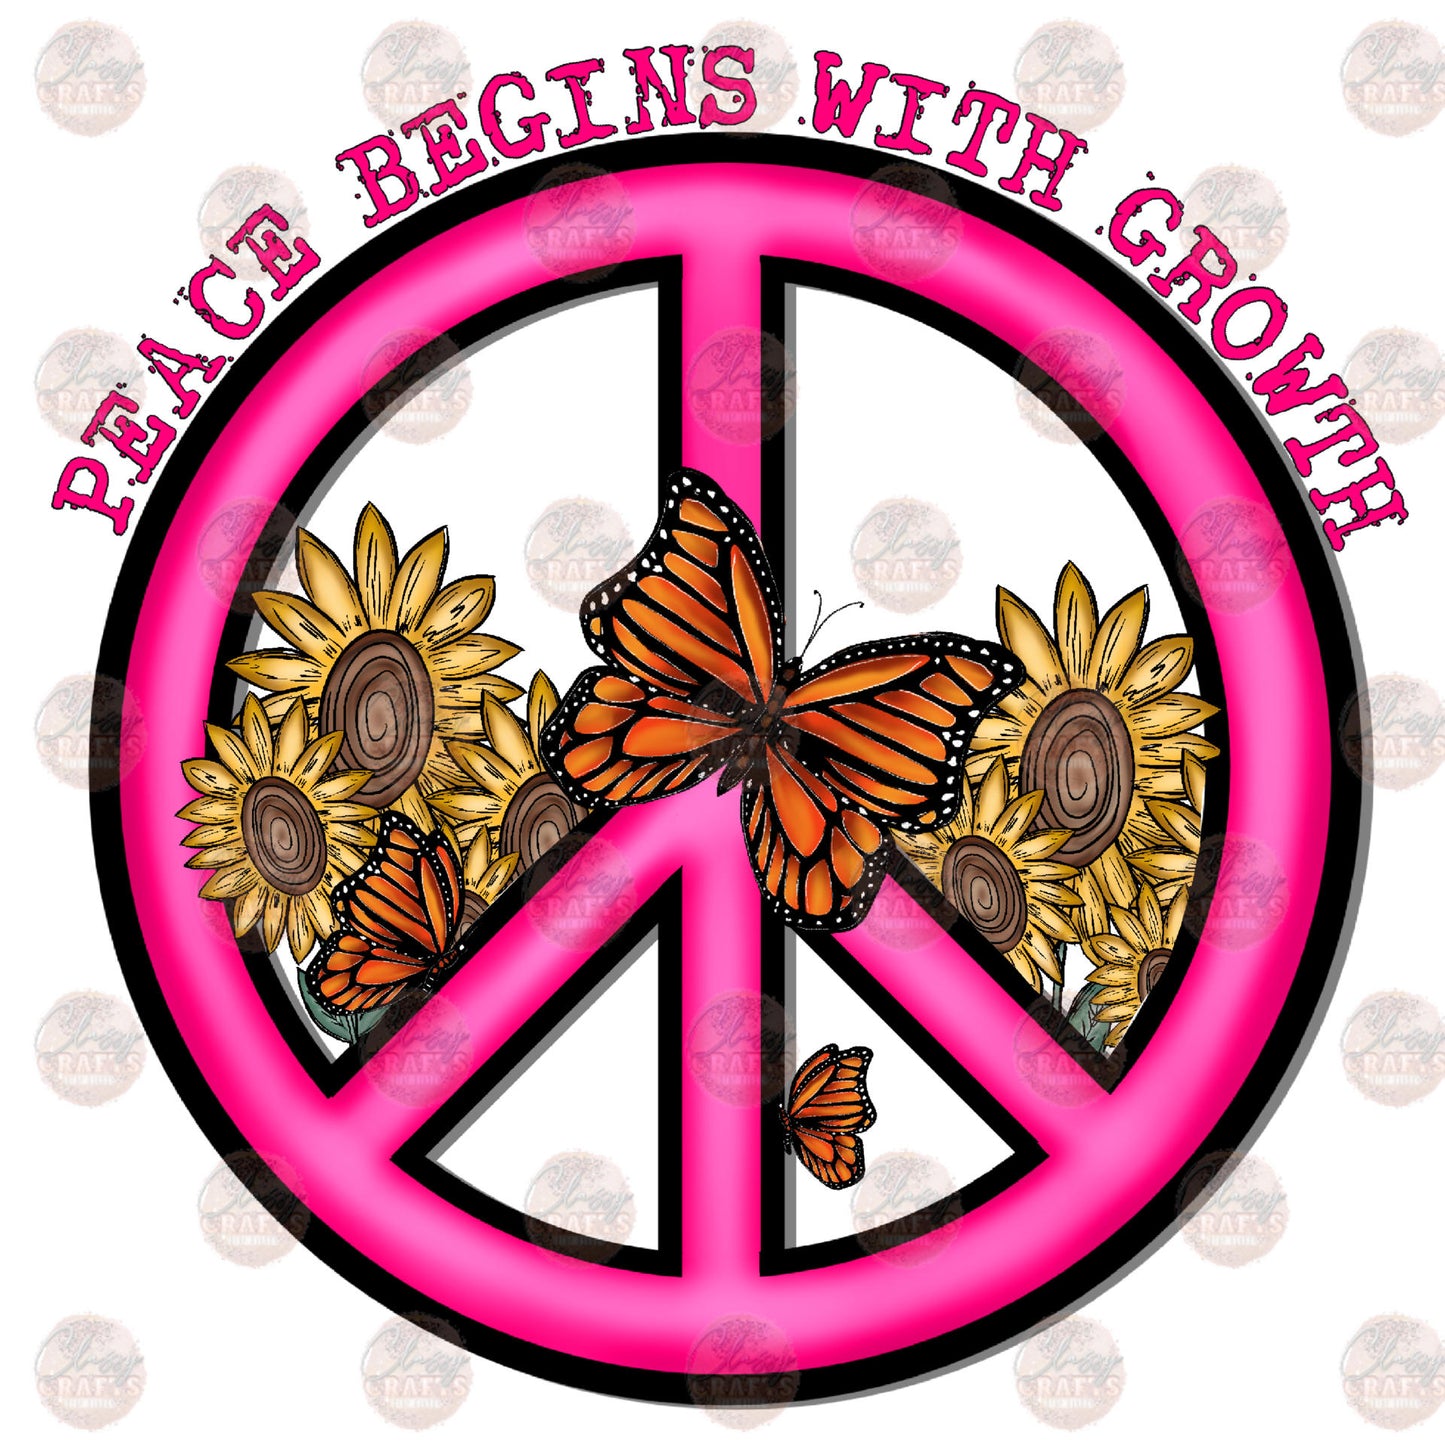 Peace Begins With Growth- Sublimation Transfer